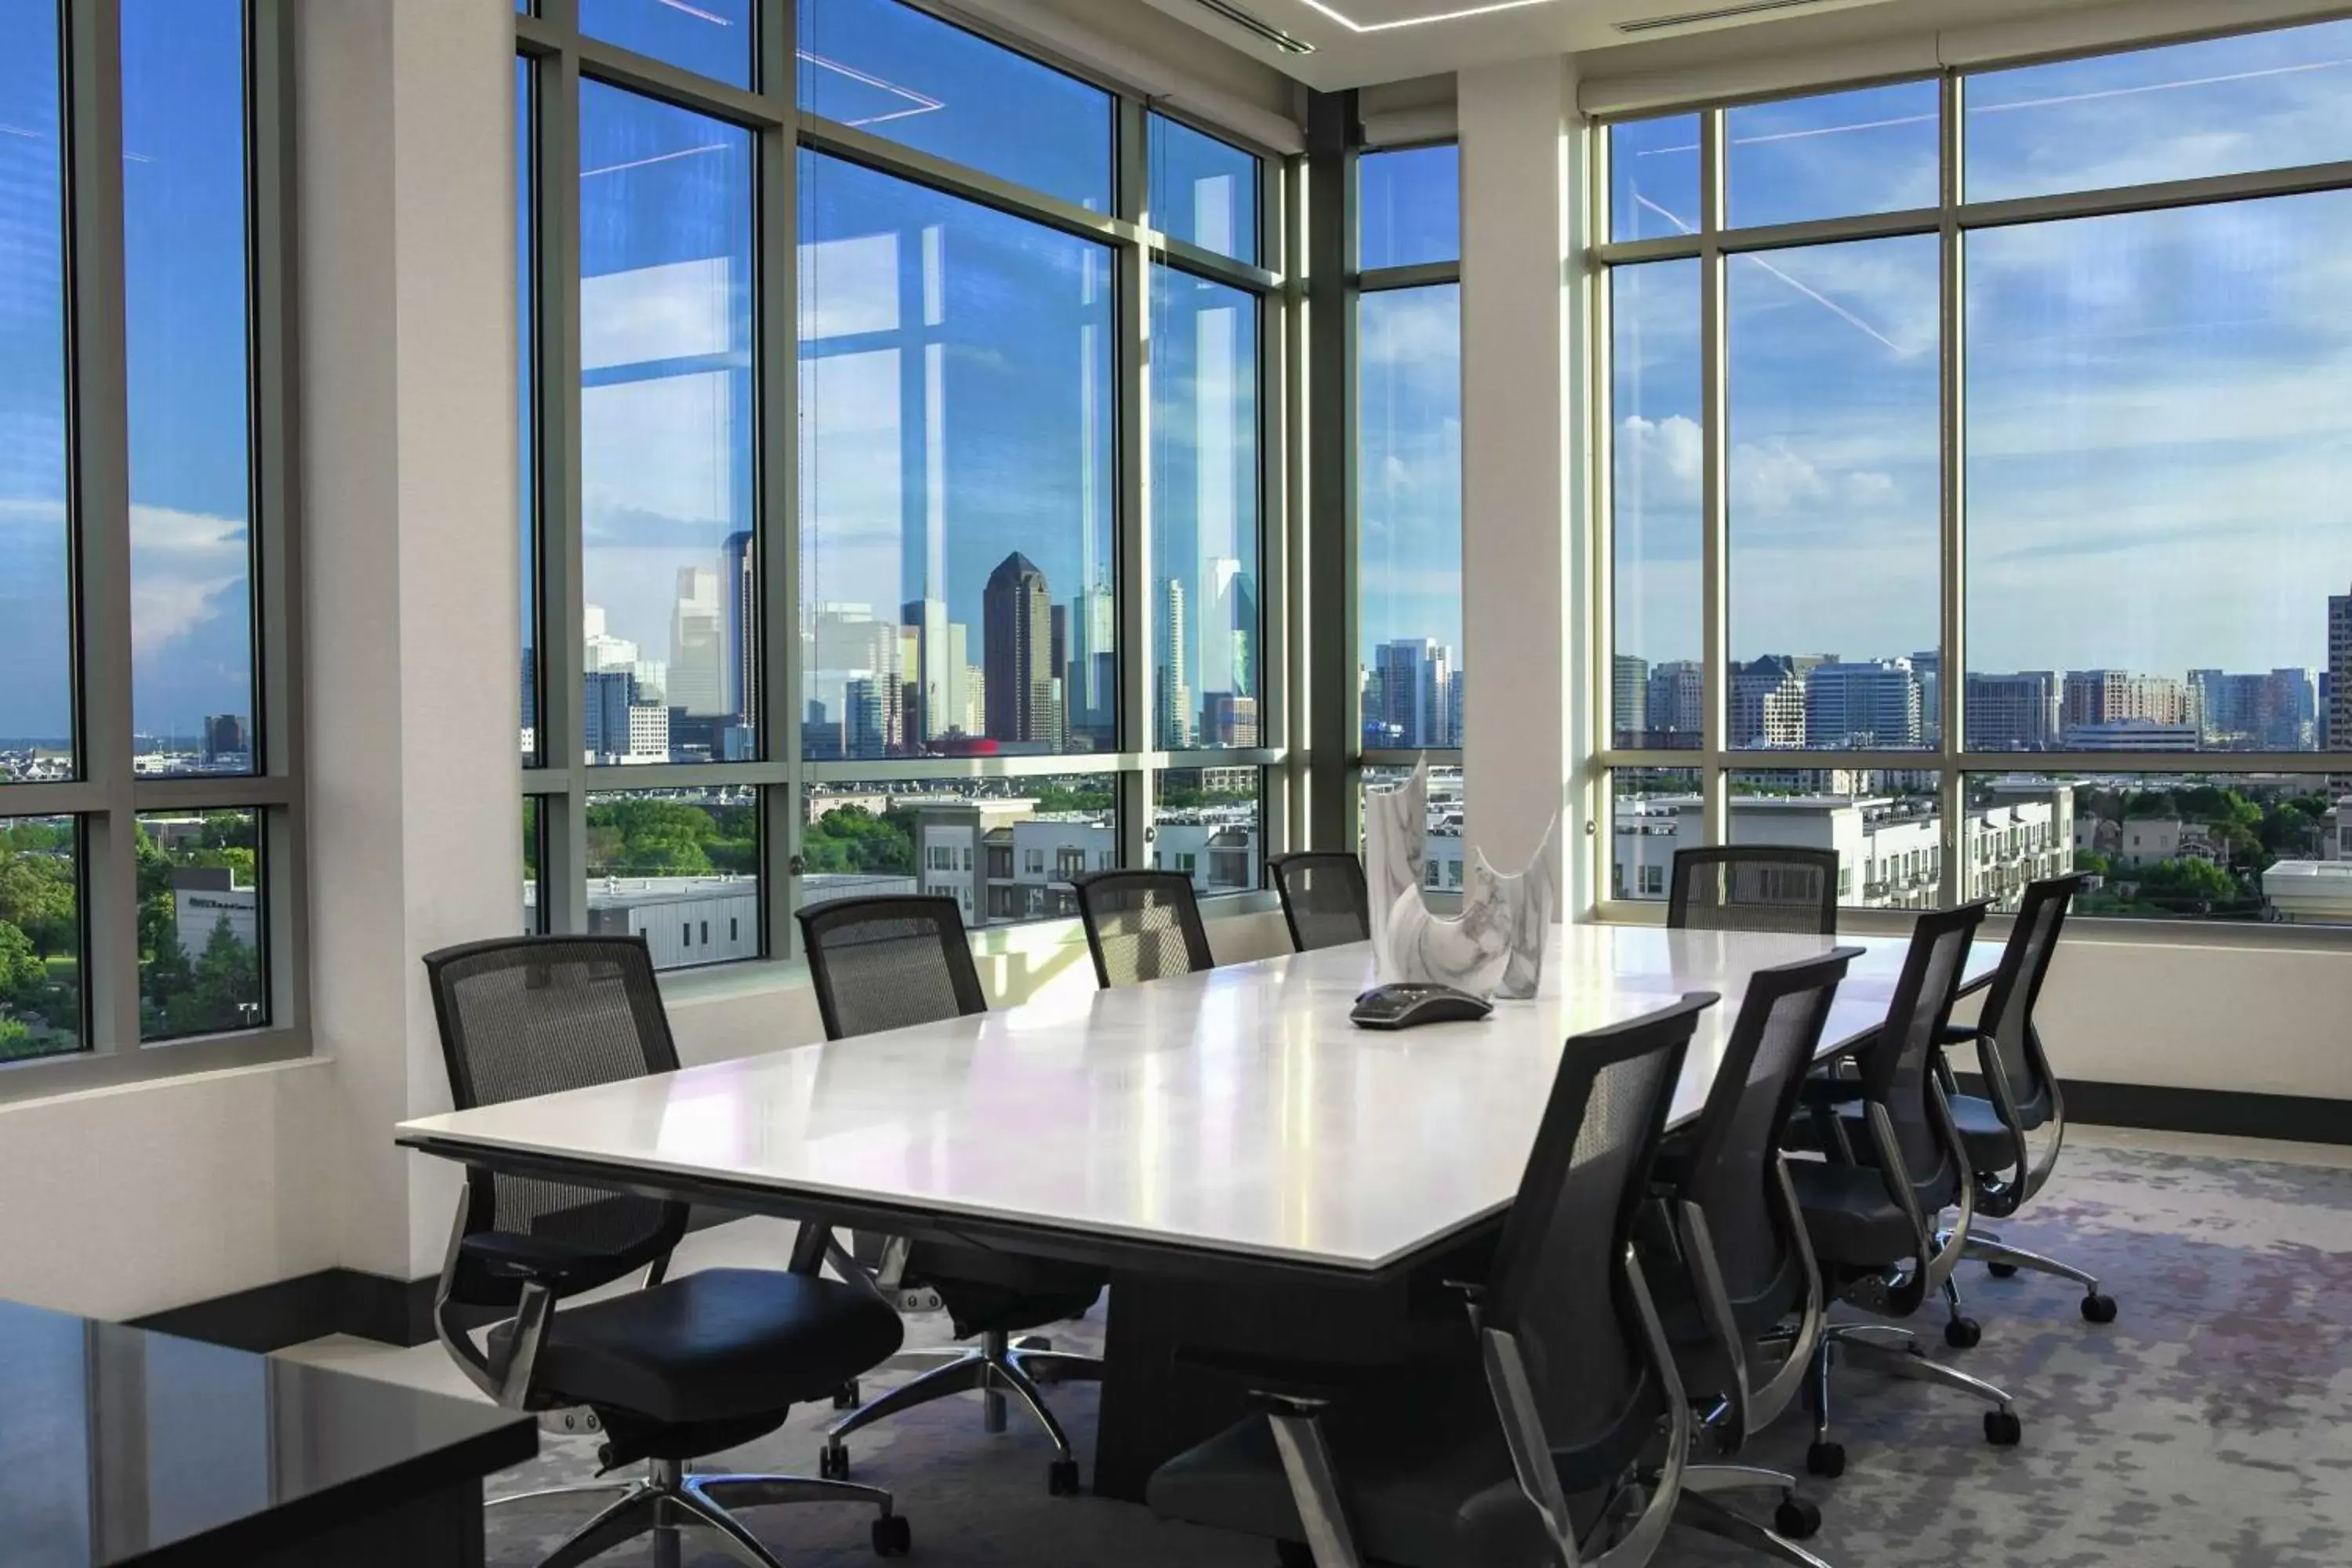 Meeting/conference room in Canopy By Hilton Dallas Uptown